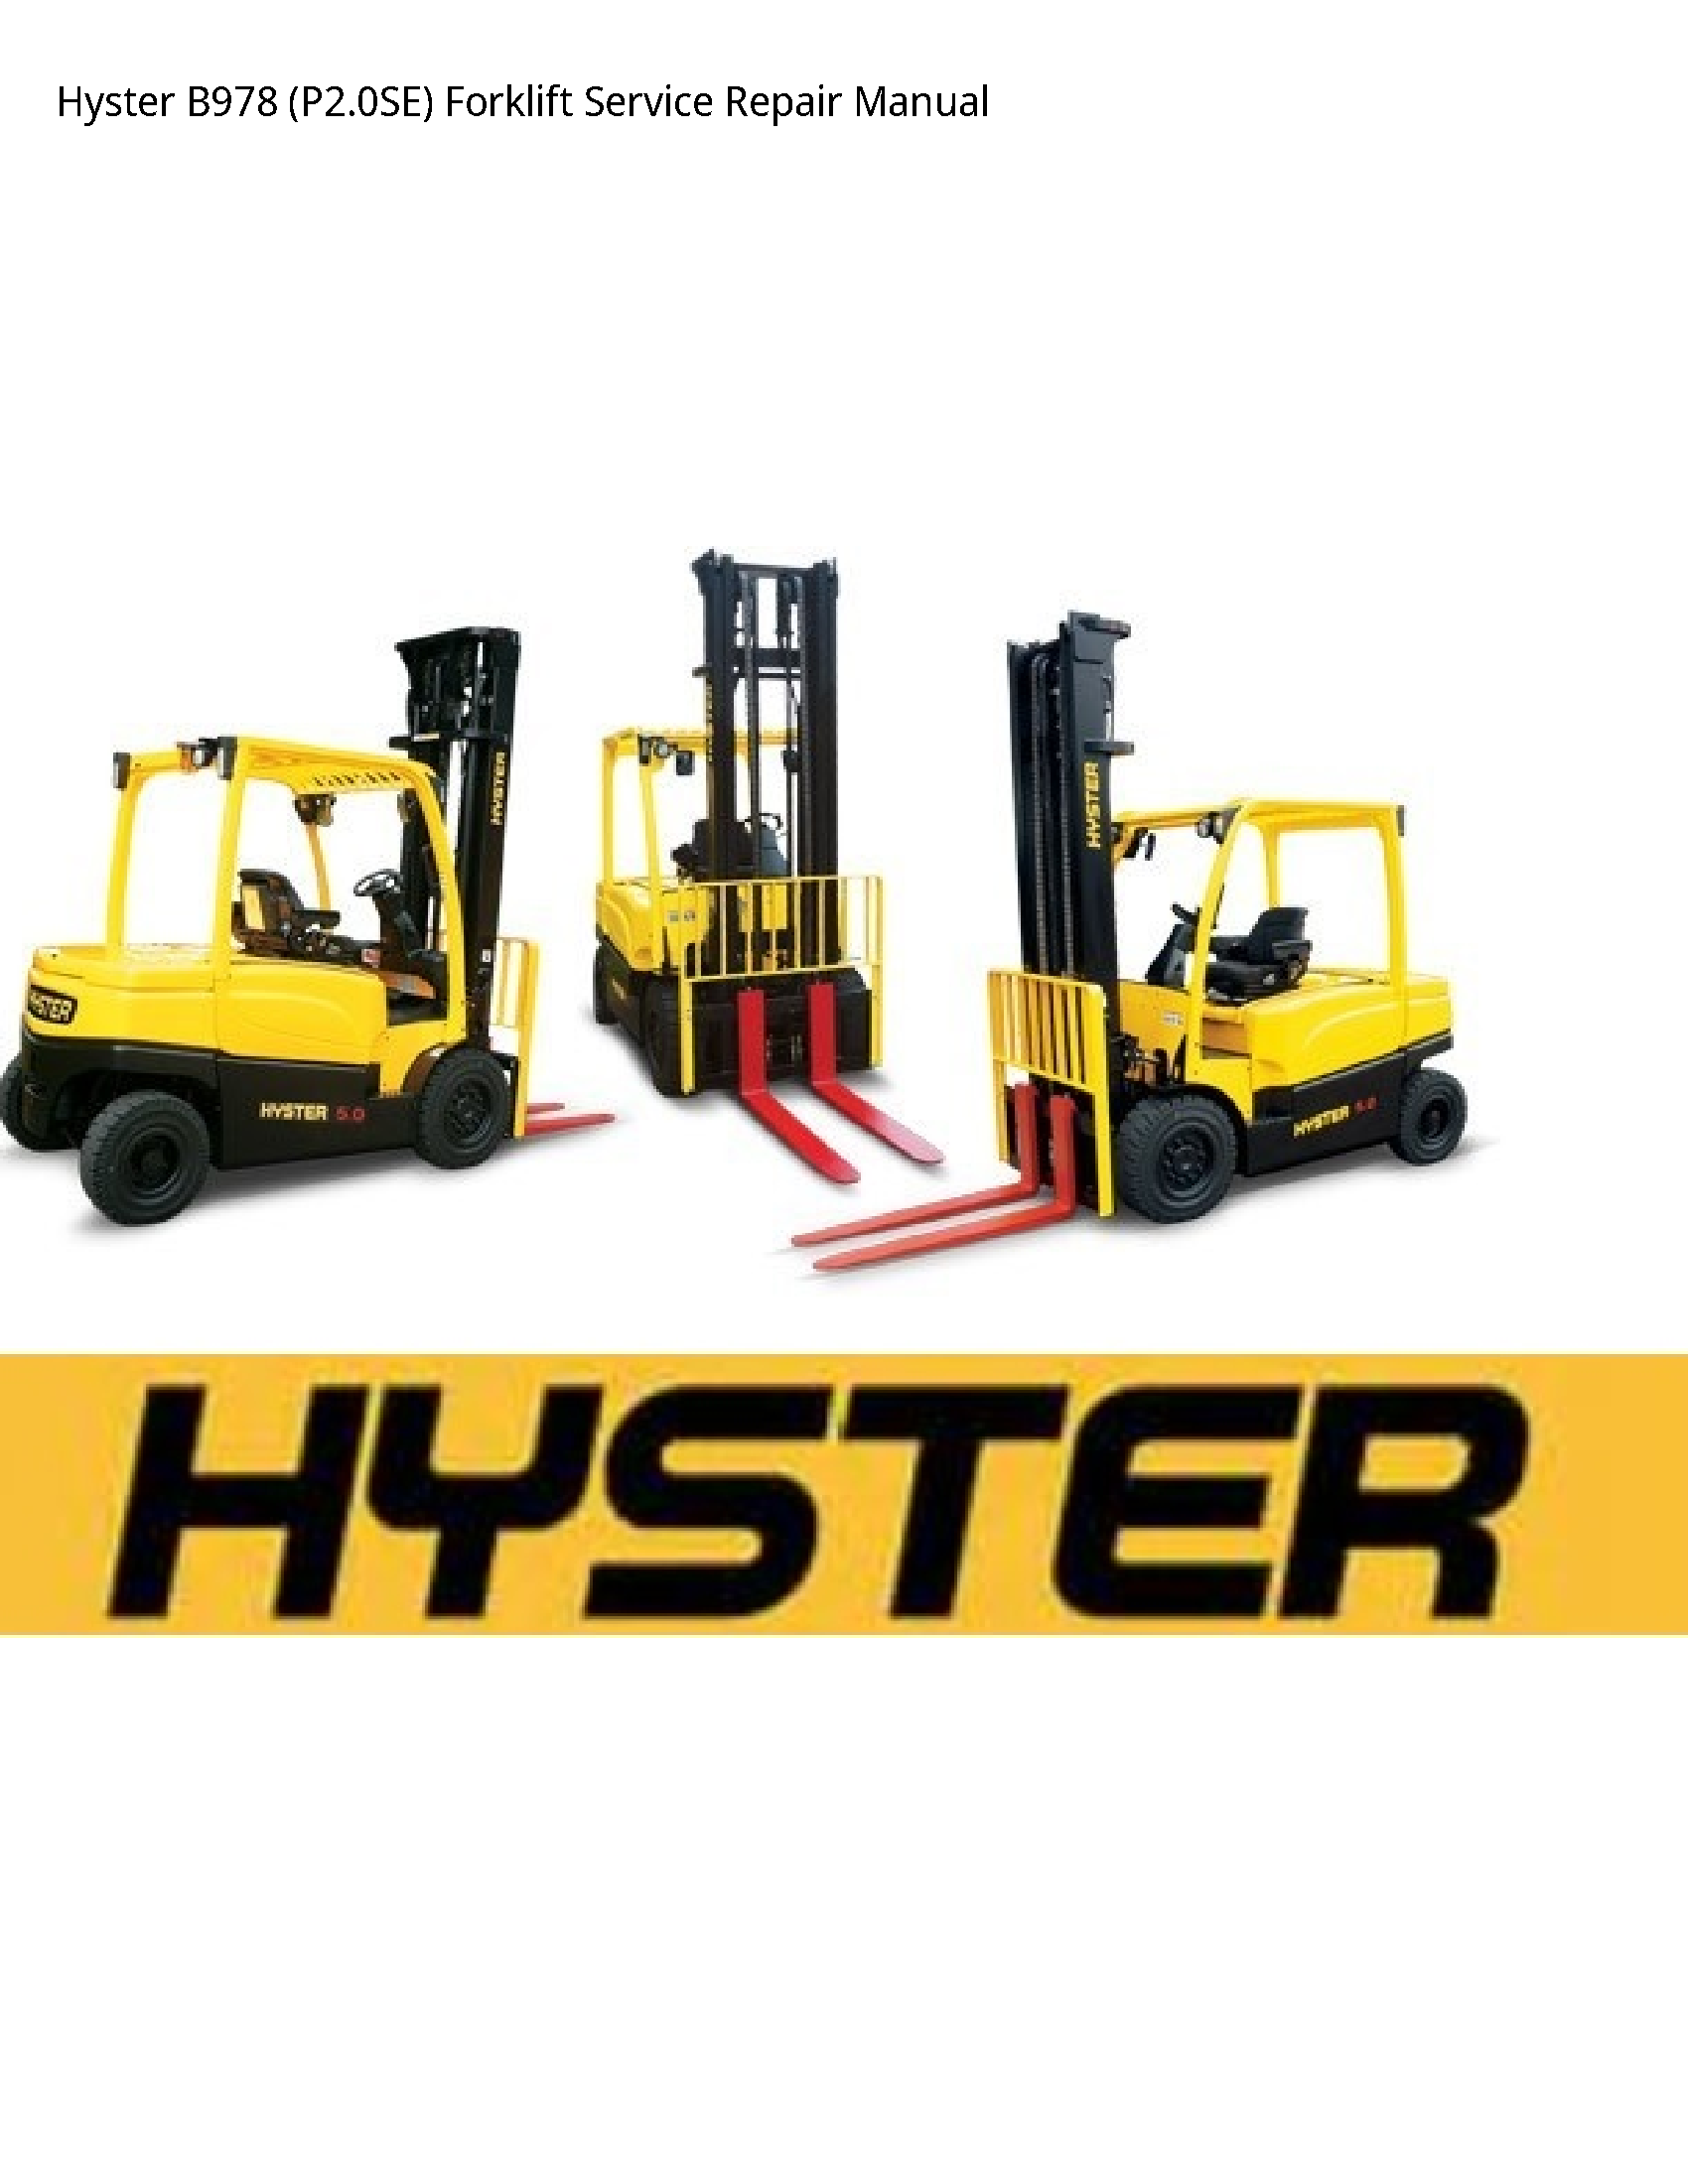 Hyster B978 Forklift manual